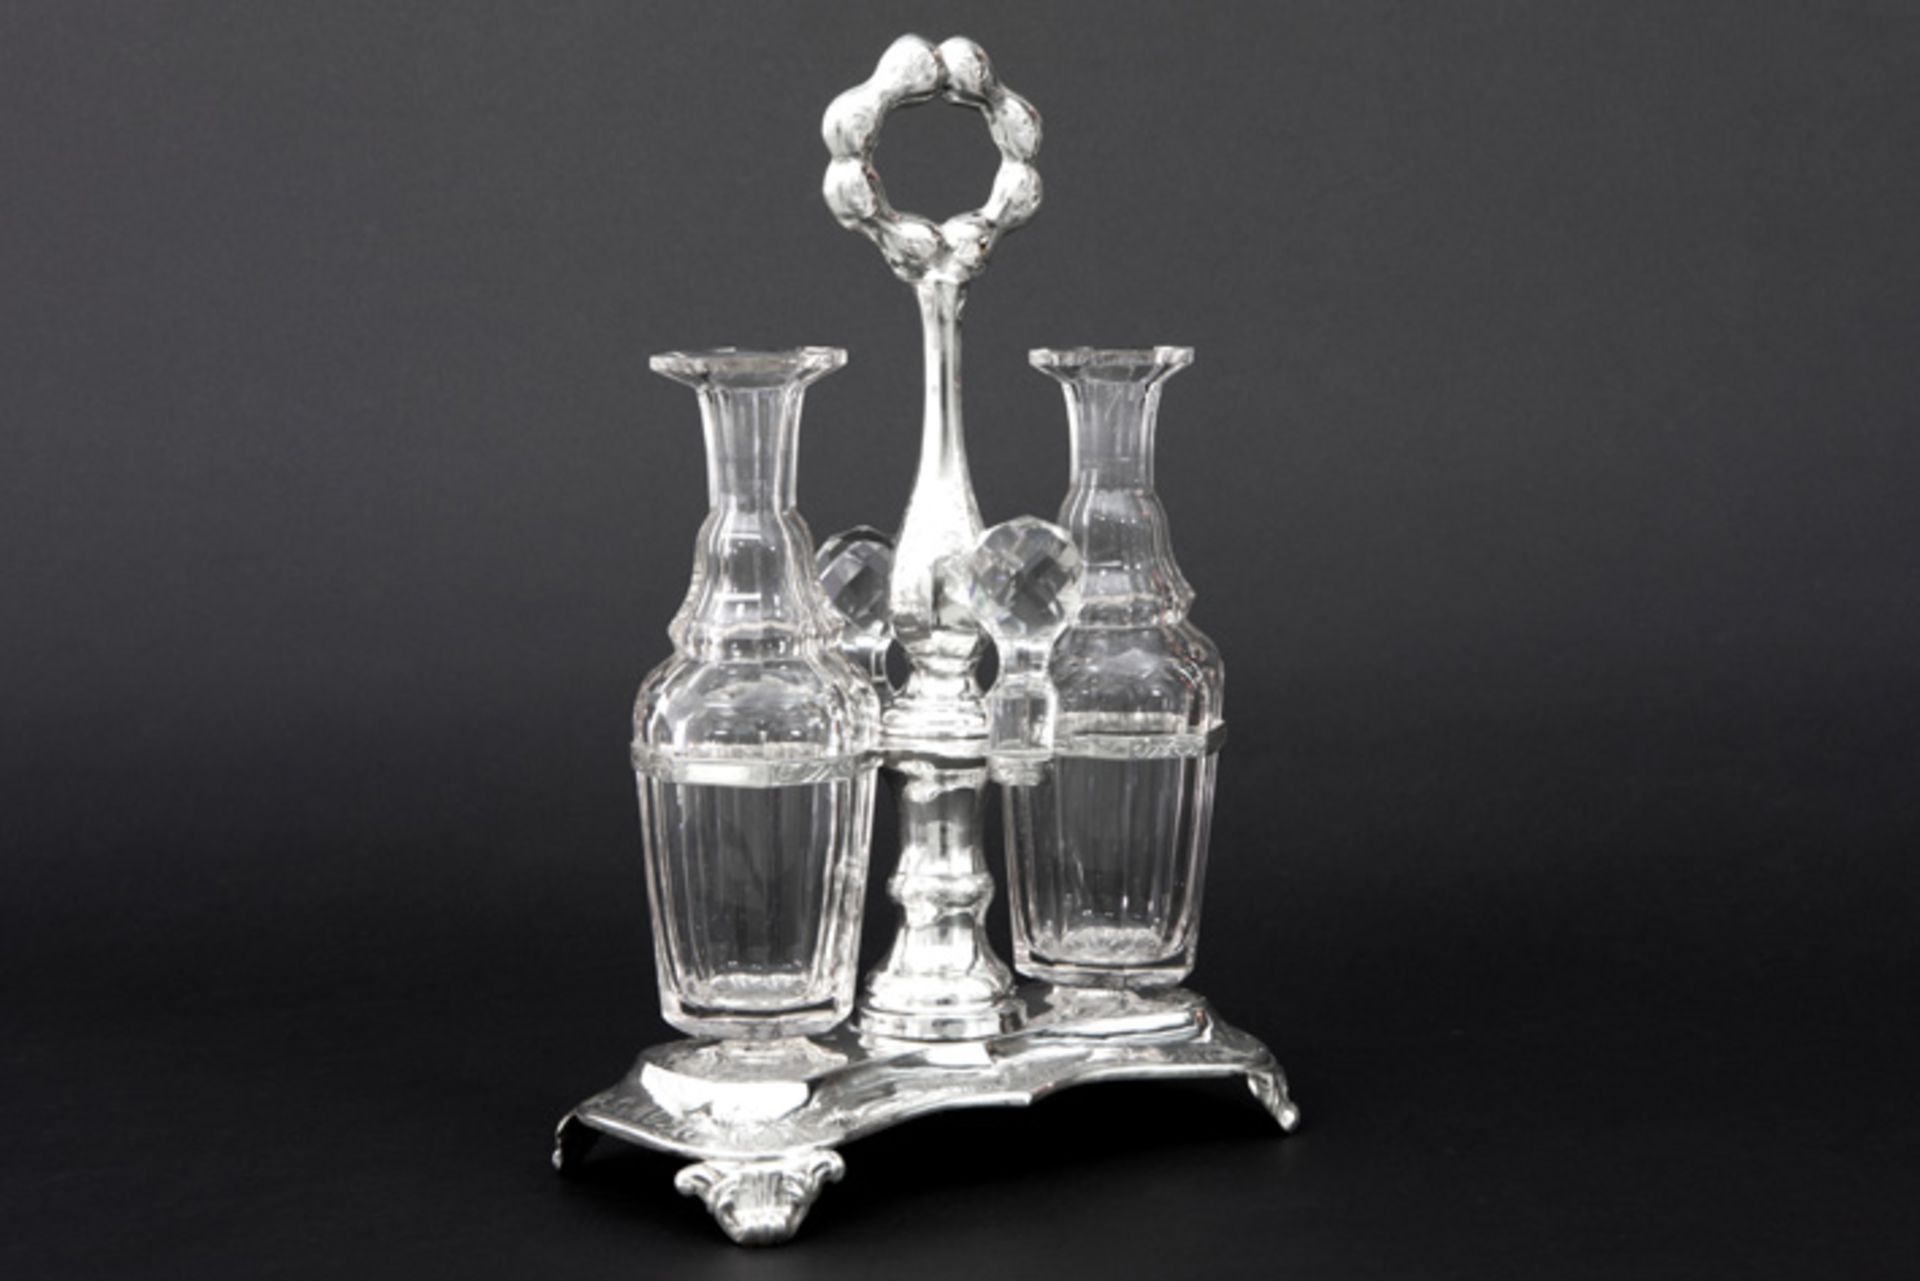 19th Cent. Dutch cruetset in "GMO" marked and 1851 dated silver and with two jugs in crystal|| - Image 2 of 3